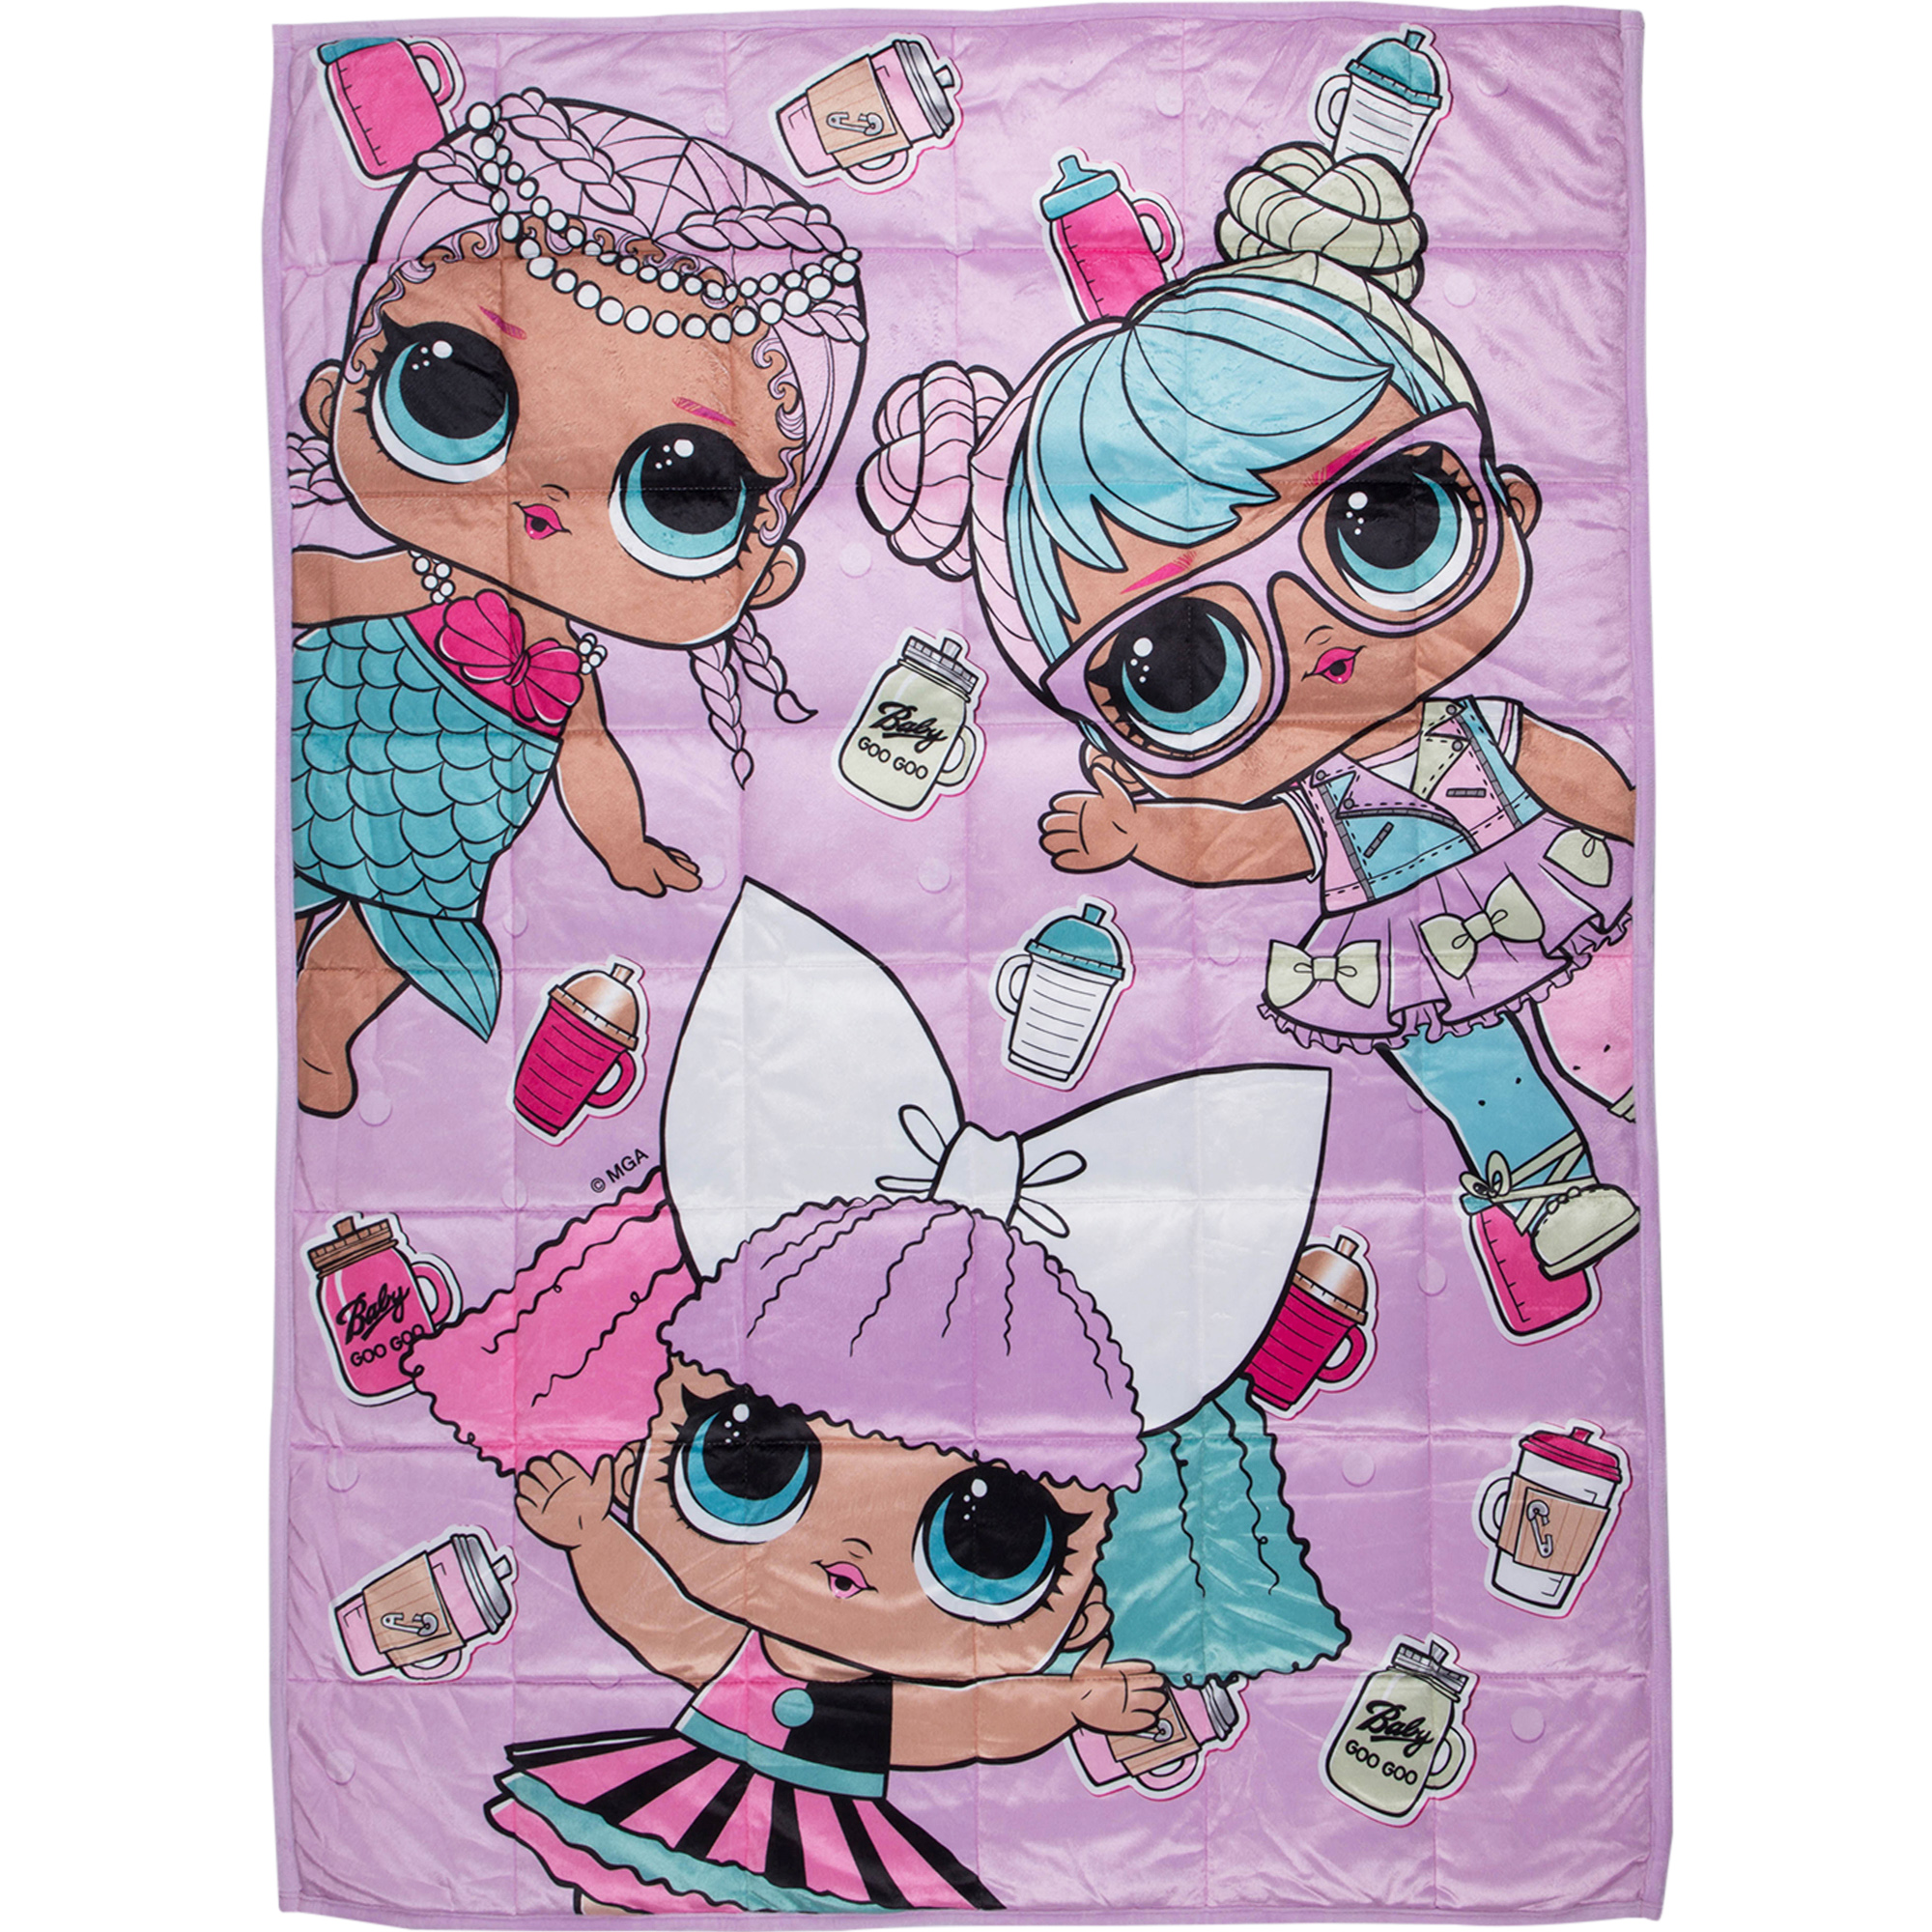 LOL Surprise Frozen Kids Weighted Blanket, 4.5lb, 36 x 48, Pink, MGA - image 2 of 11